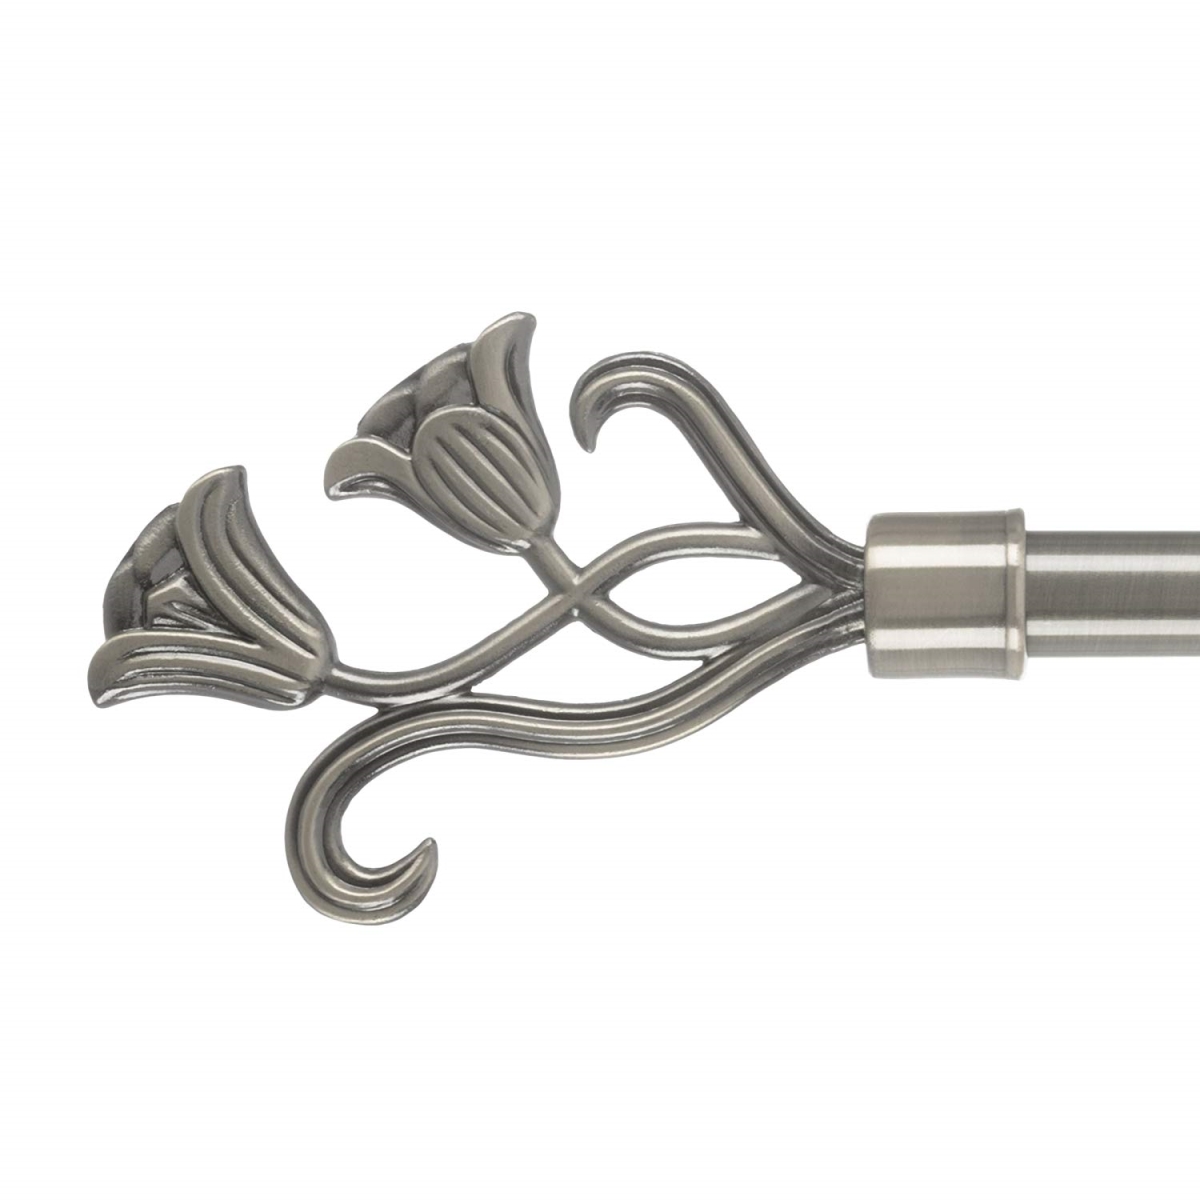 63a-46931 Curtain Rod With Mounting Hardware & Decorative Floral Finials, Pewter - 48-86 In.